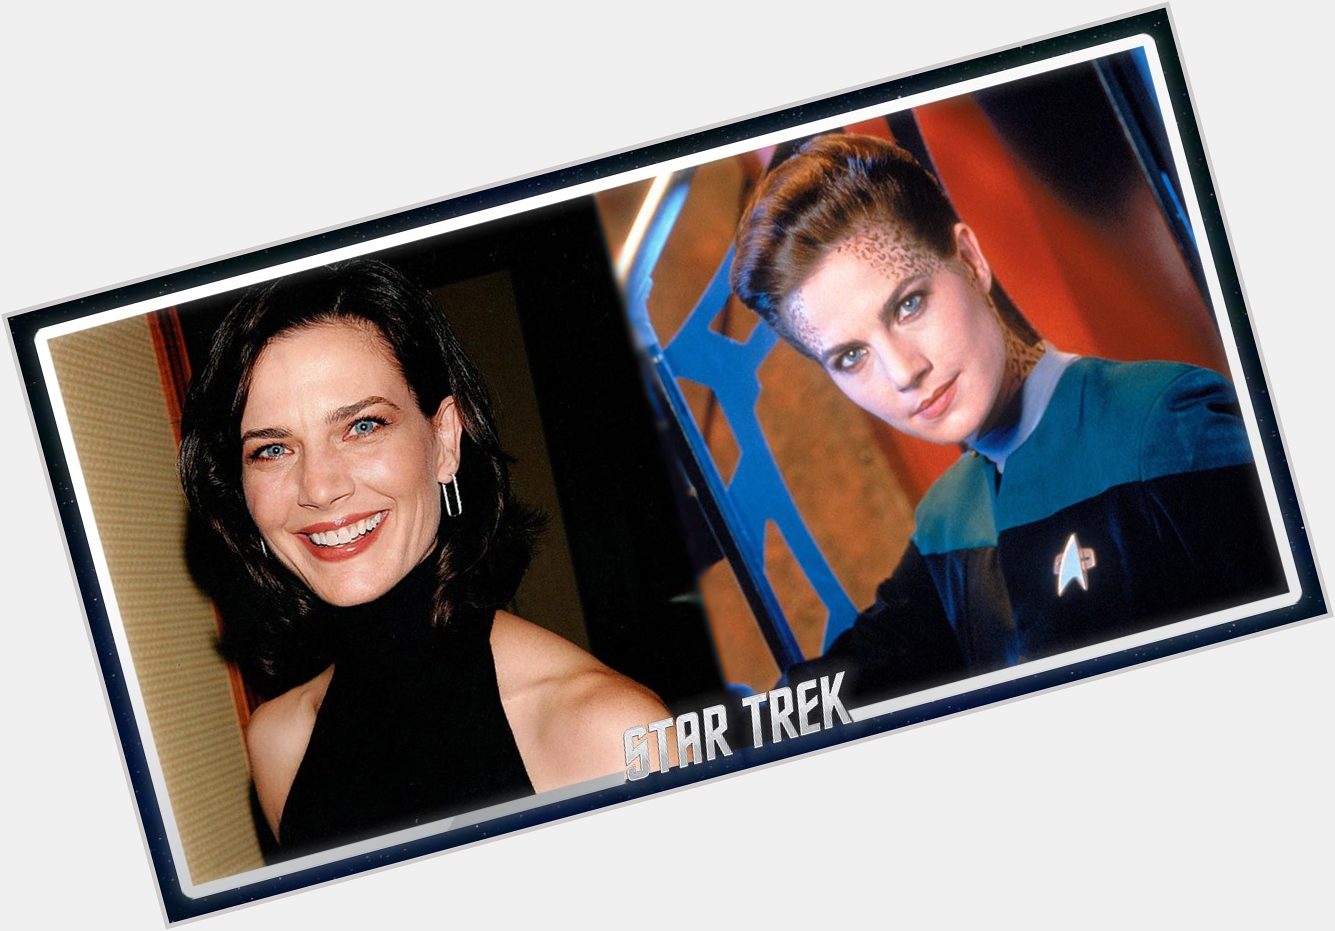 Please join us in wishing a very Happy Birthday to Terry Farrell, also known as Jadzia Dax 